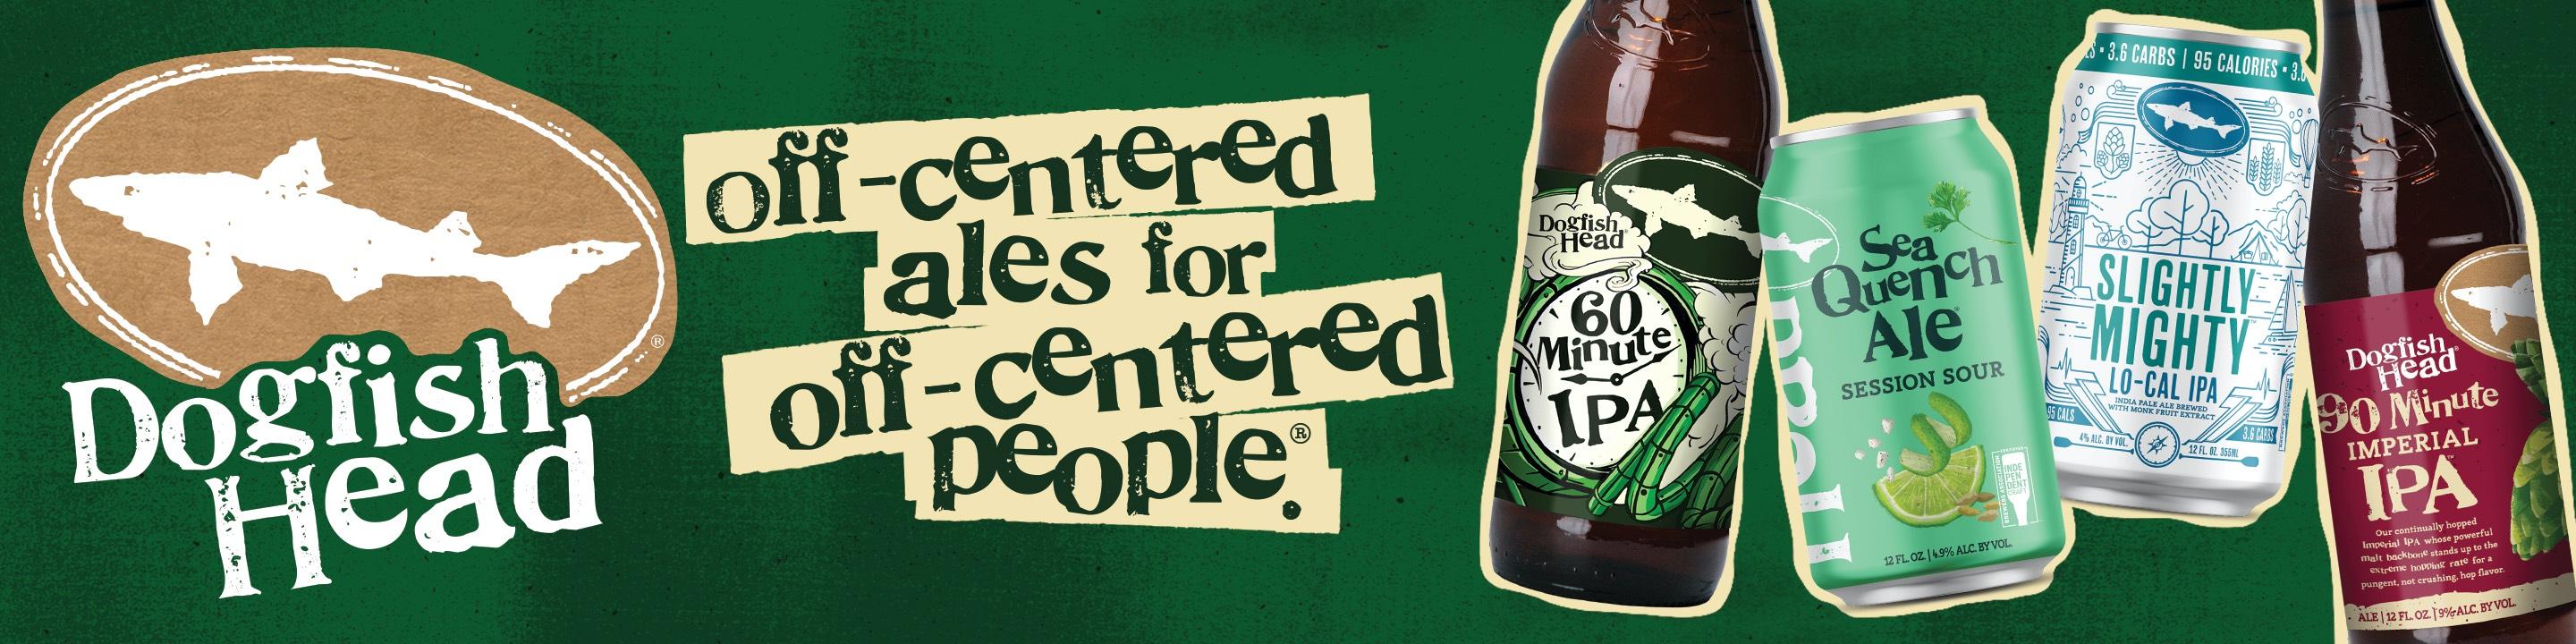 At Dogfish Head Craft Brewery, we brew off-centered ales for off-centered people. We incorporate culinary ingredients and unique processes to create blissfully inefficient, amazing delicious beers for people like you.